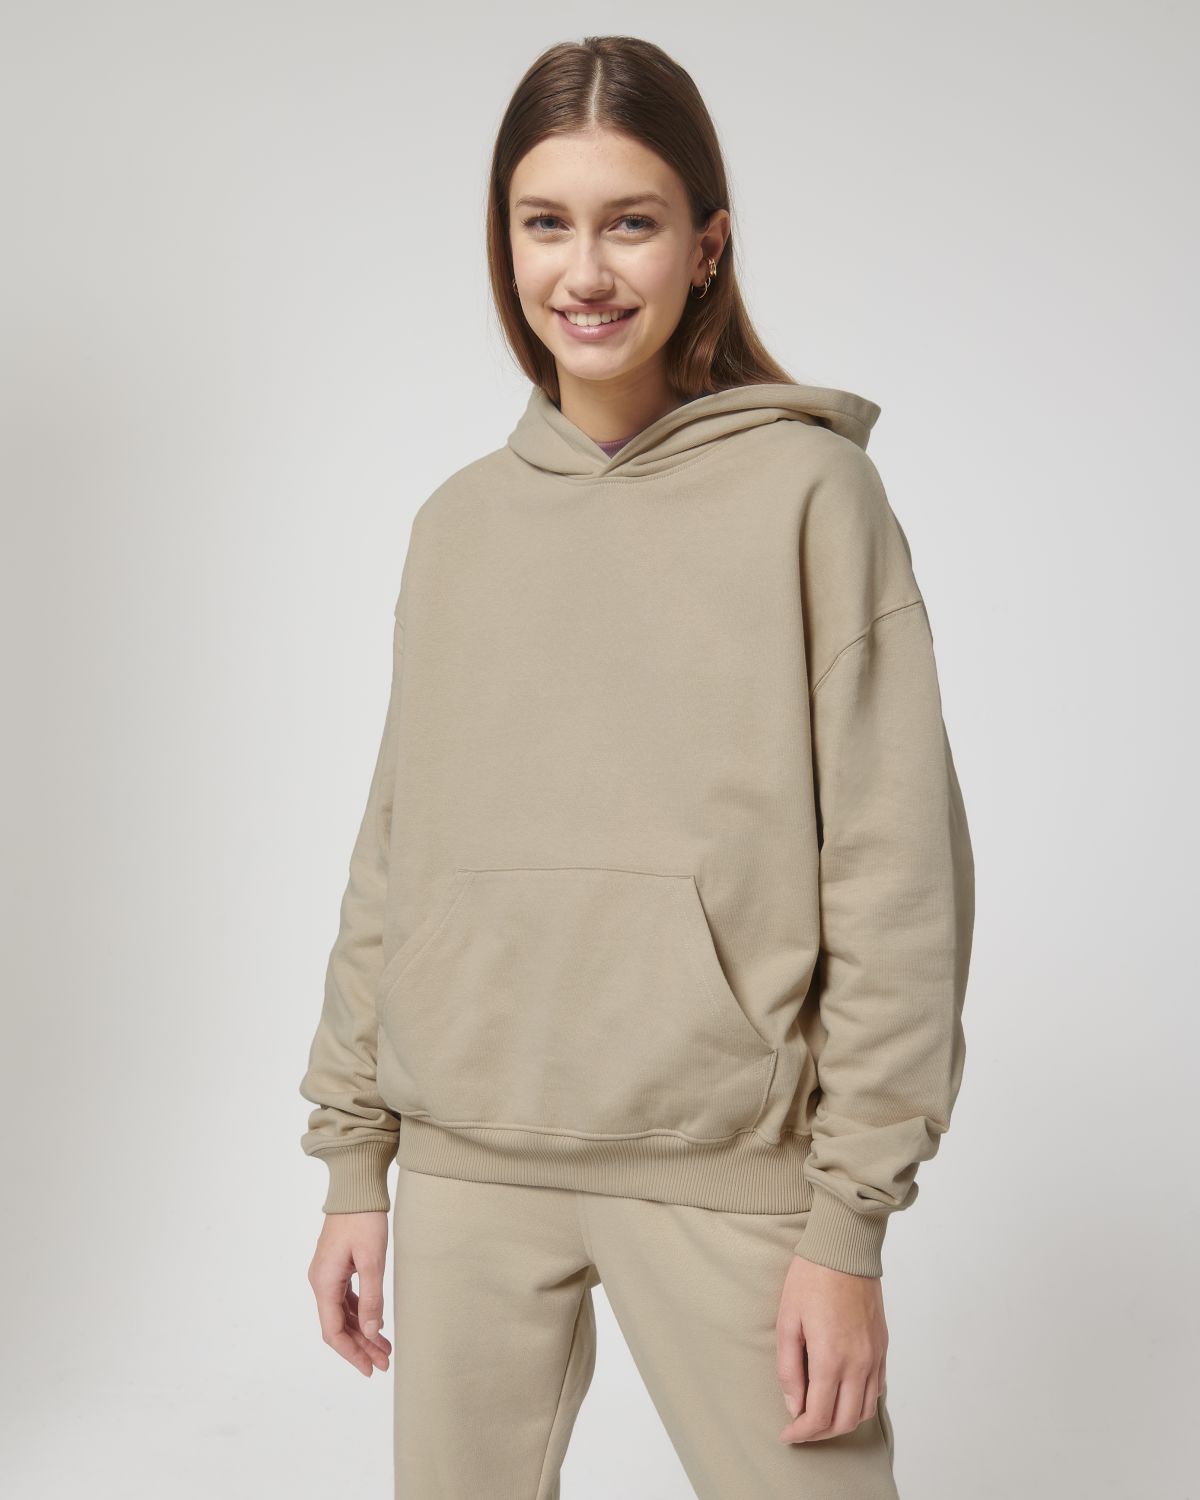 Oversized hoodie with a frame in the back